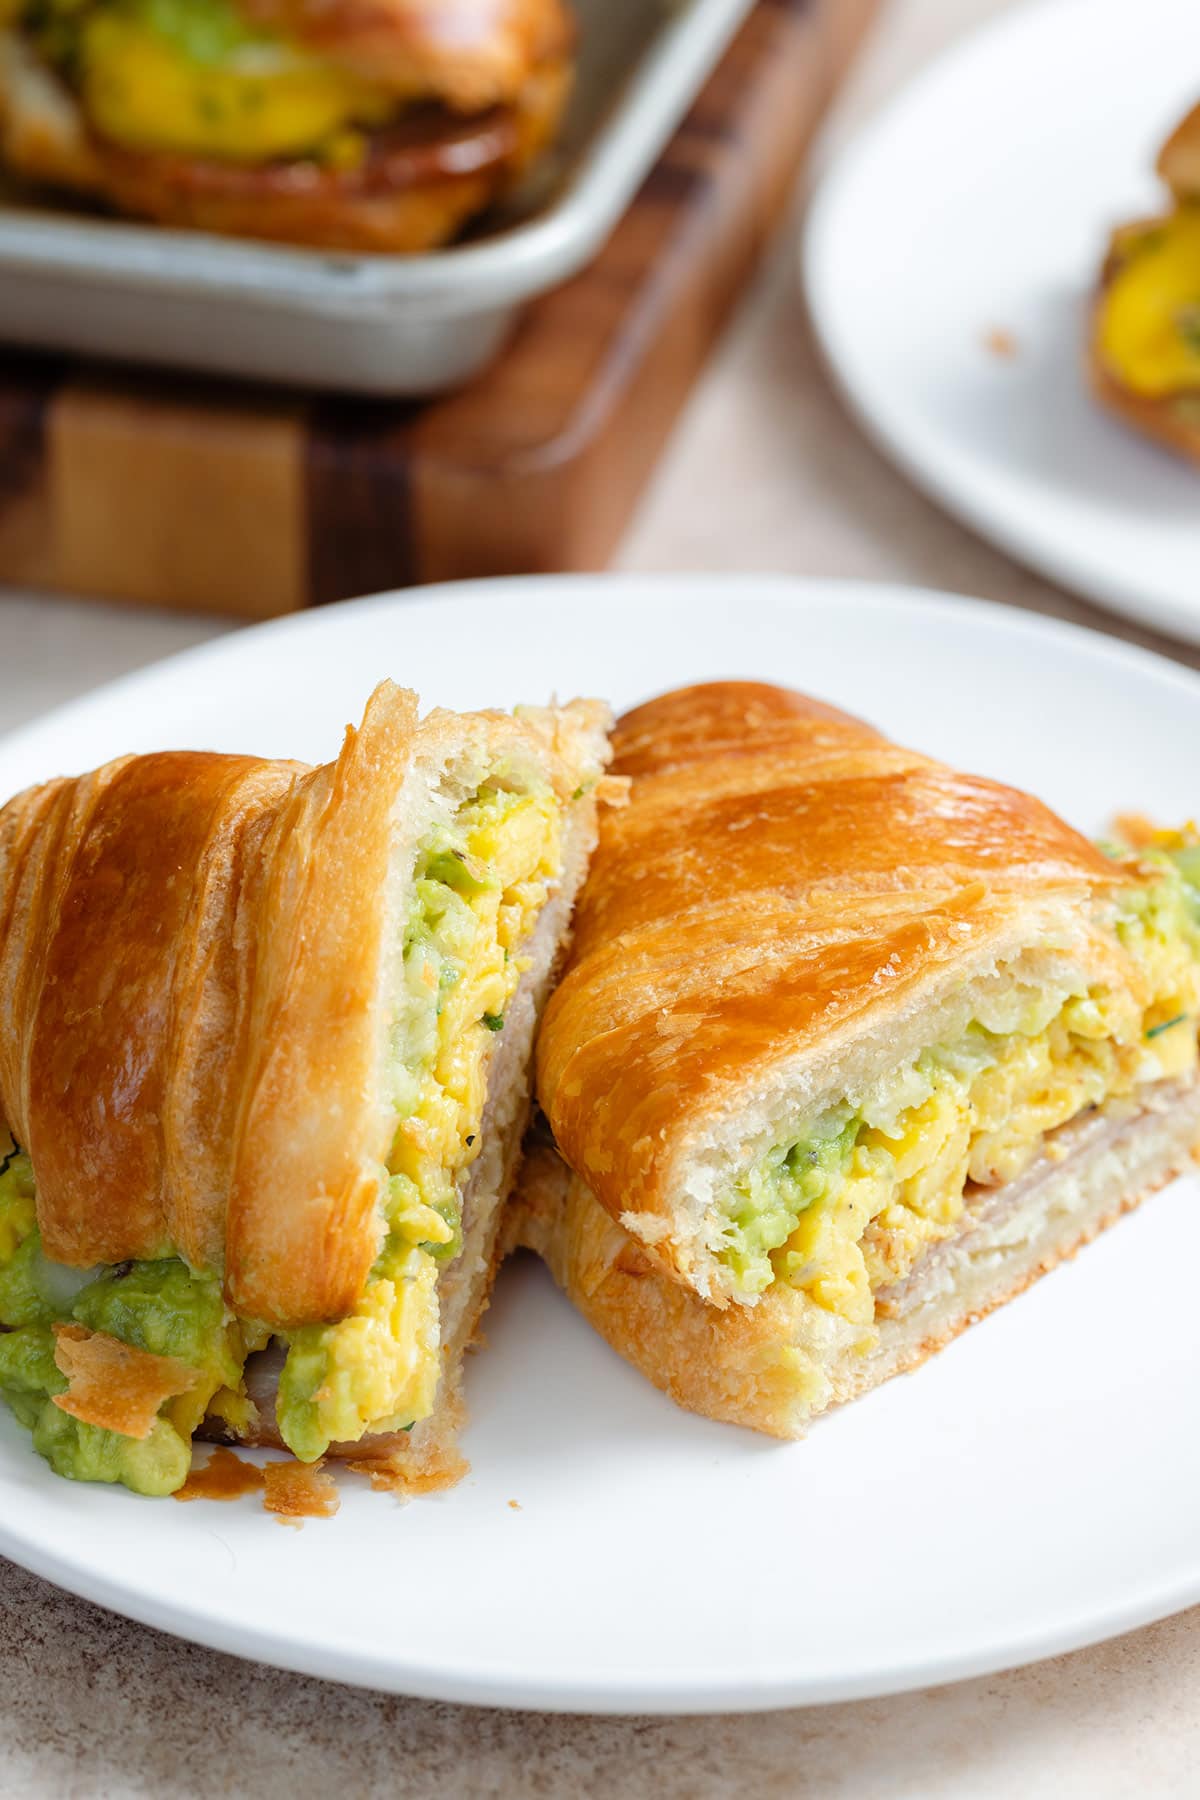 A toasted croissant filled with scrambled eggs, turkey bacon, and avocado that's been cut in half to show what's inside it on a white plate with more croissants in the background.